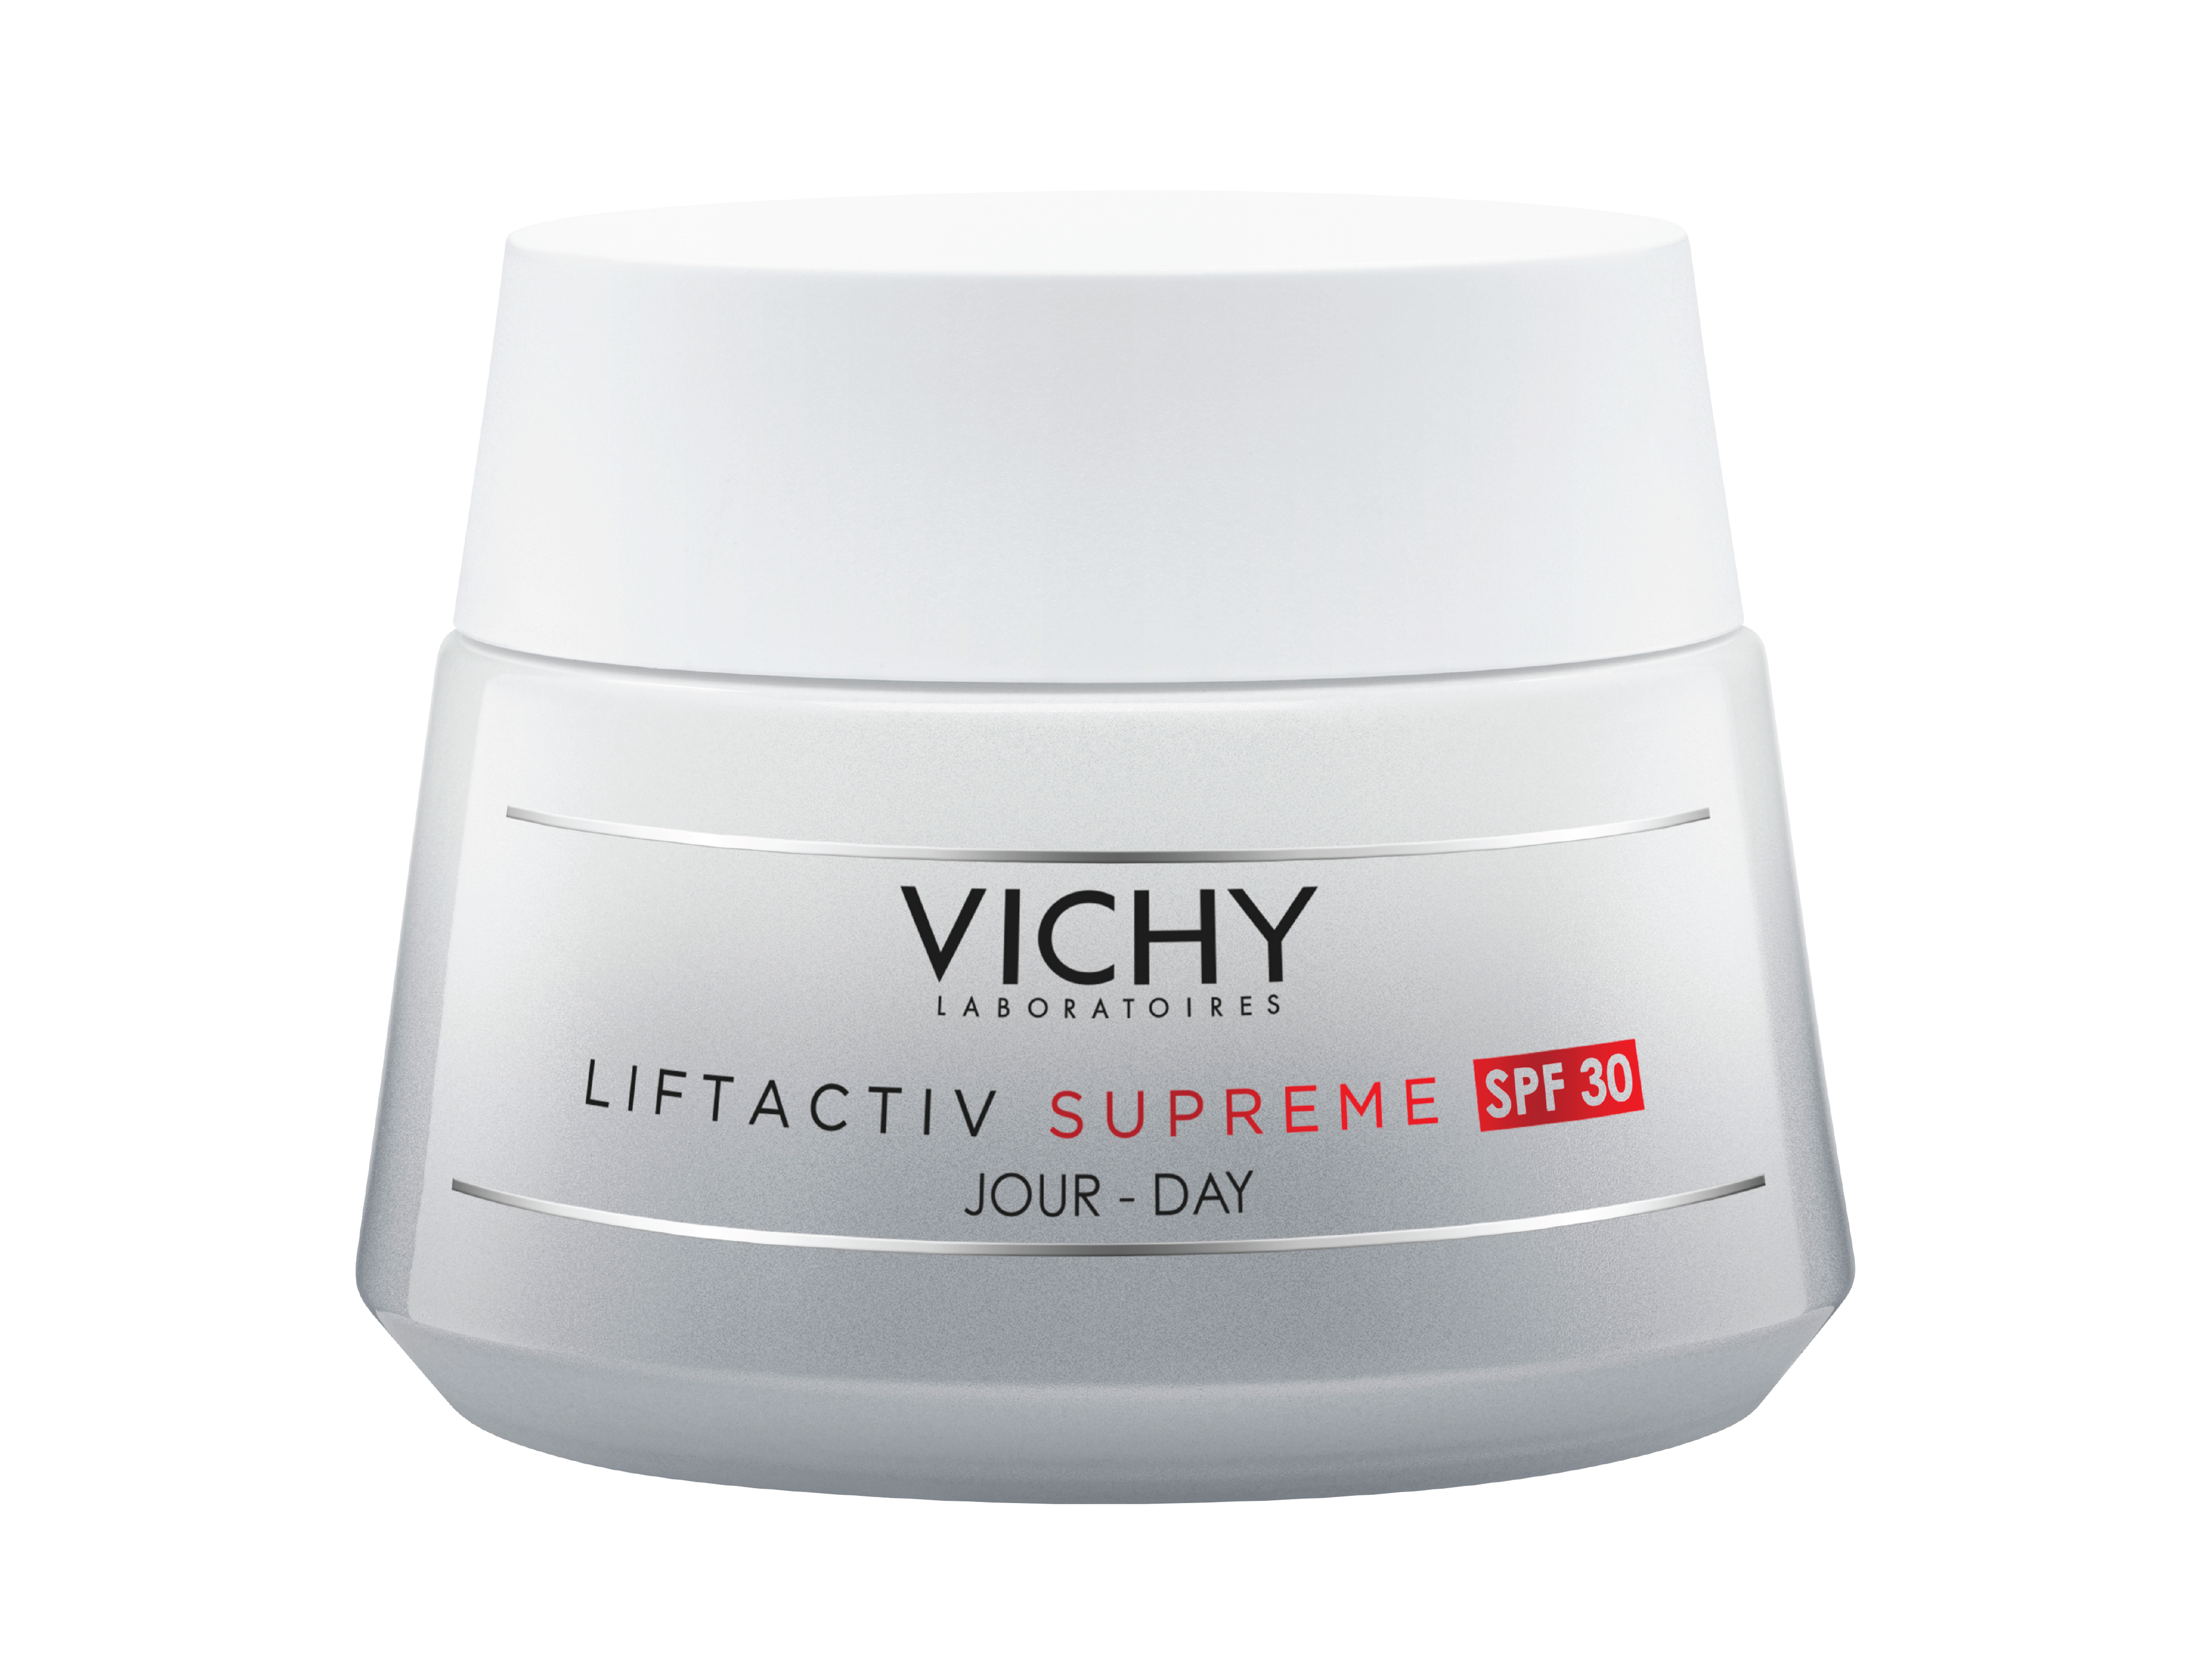 Vichy Liftactiv Supreme Intensive Anti-Wrinkle & Firming Care SPF30 Day Cream, 50 ml